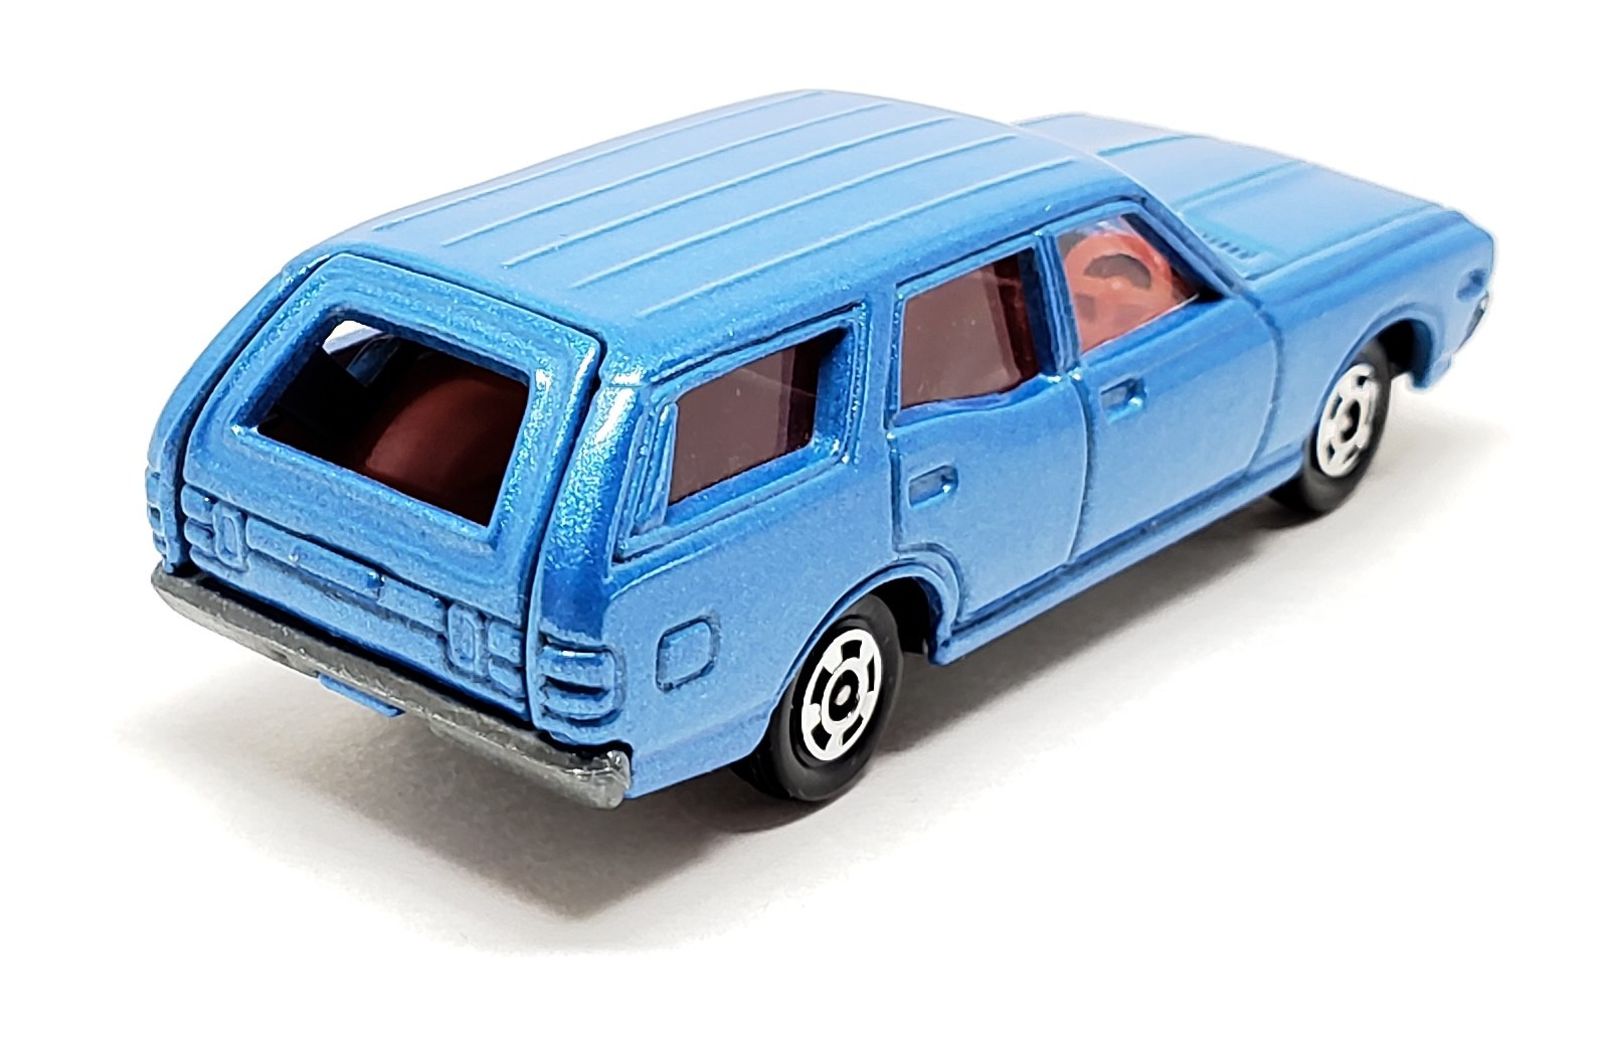 Illustration for article titled [REVIEW] Tomica Nissan Gloria Van